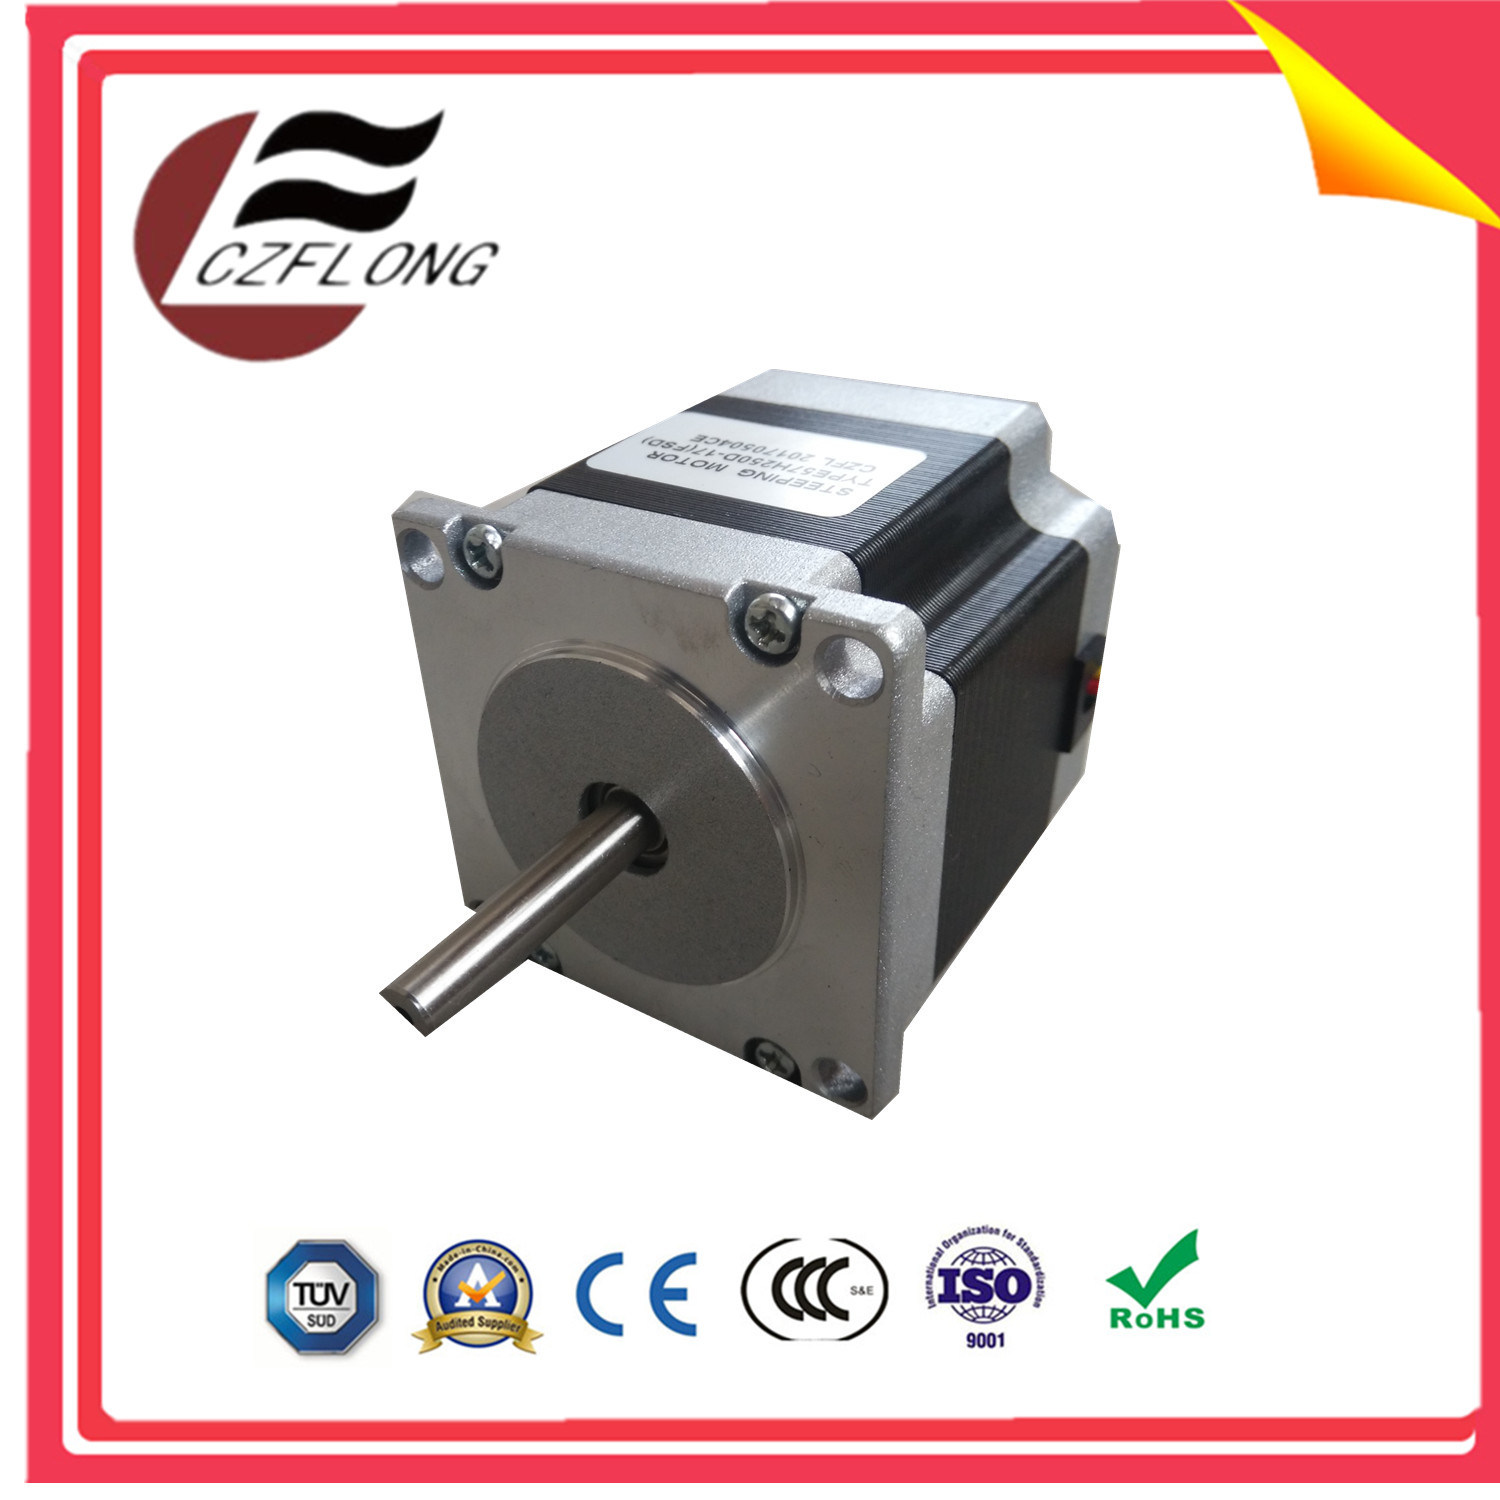 Small Noise DC Stepper/Servo/Stepping Motor for Juki Embroidery Machine